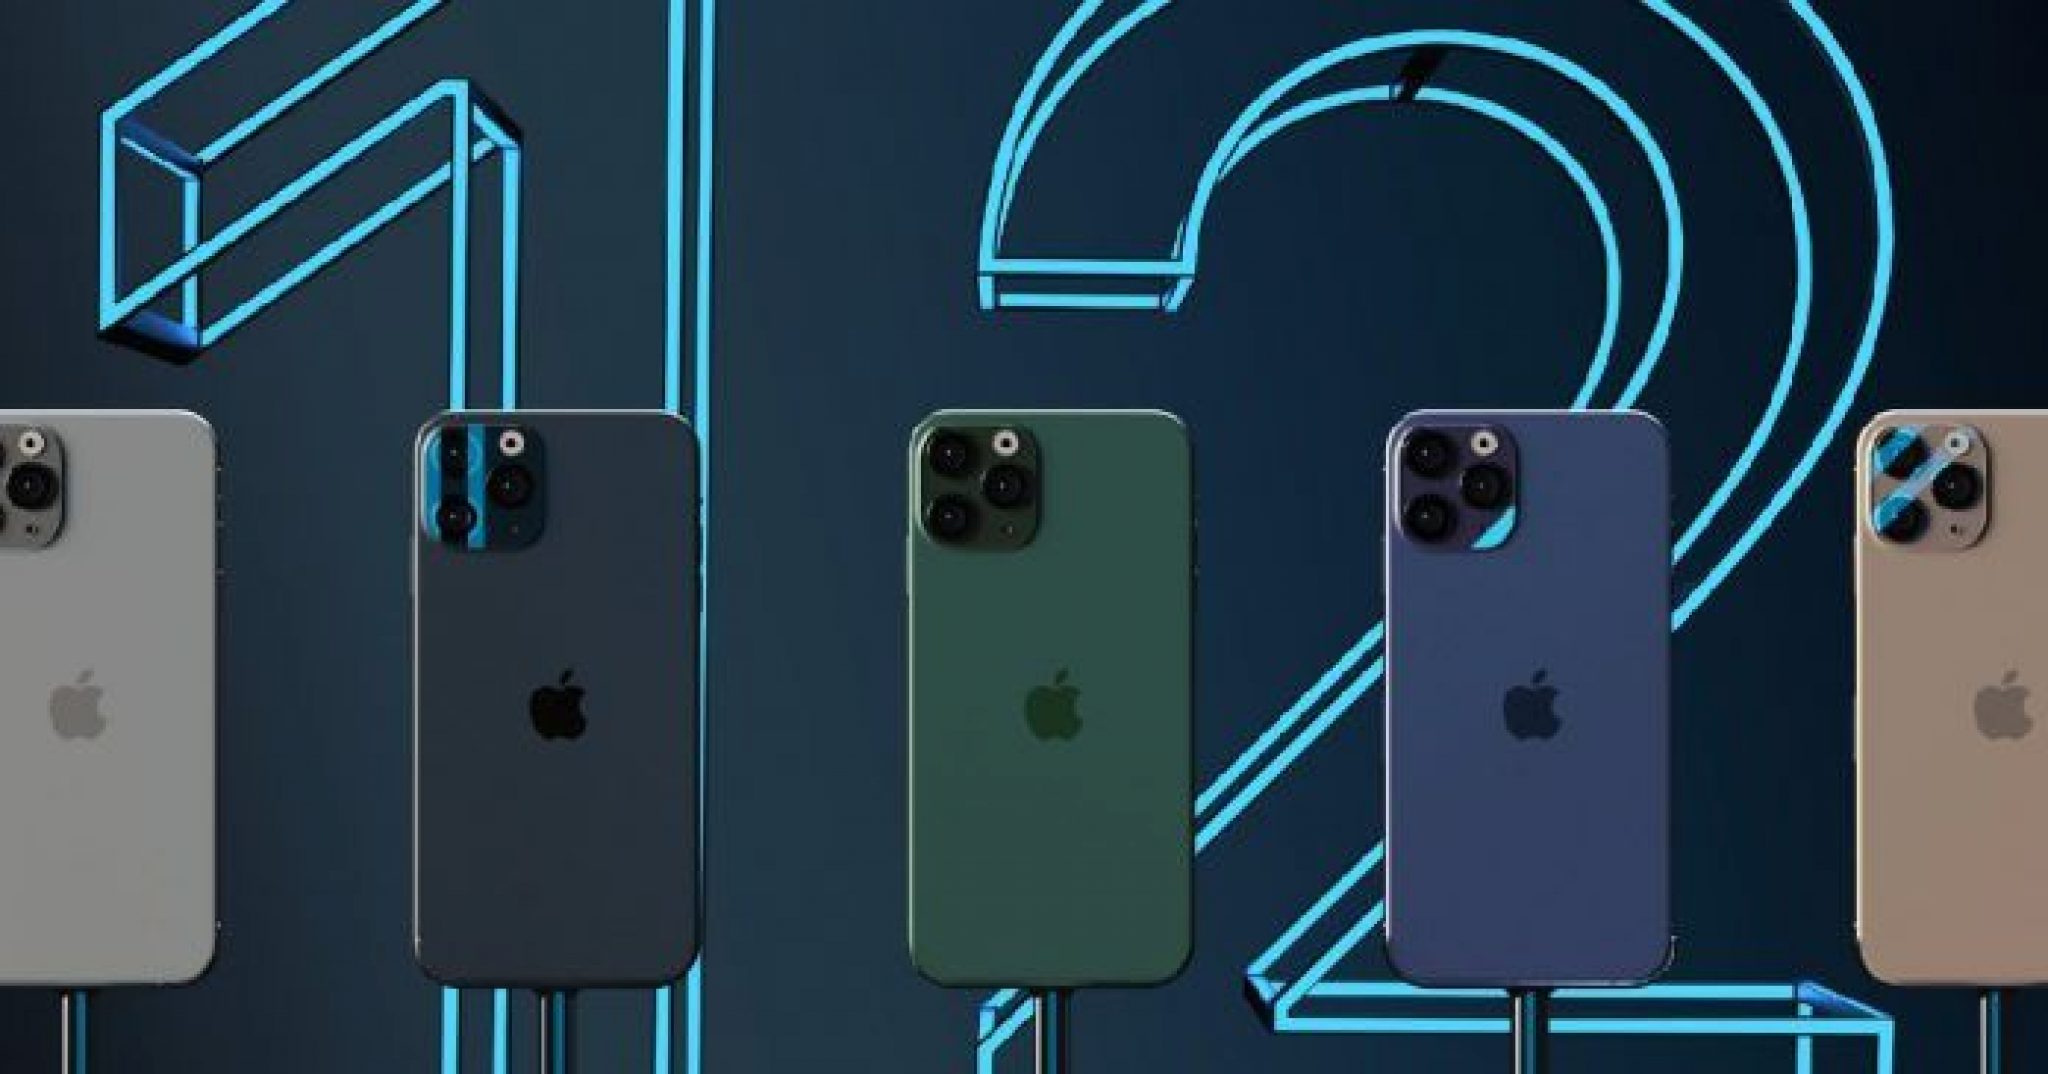 1 iphone 12 colors